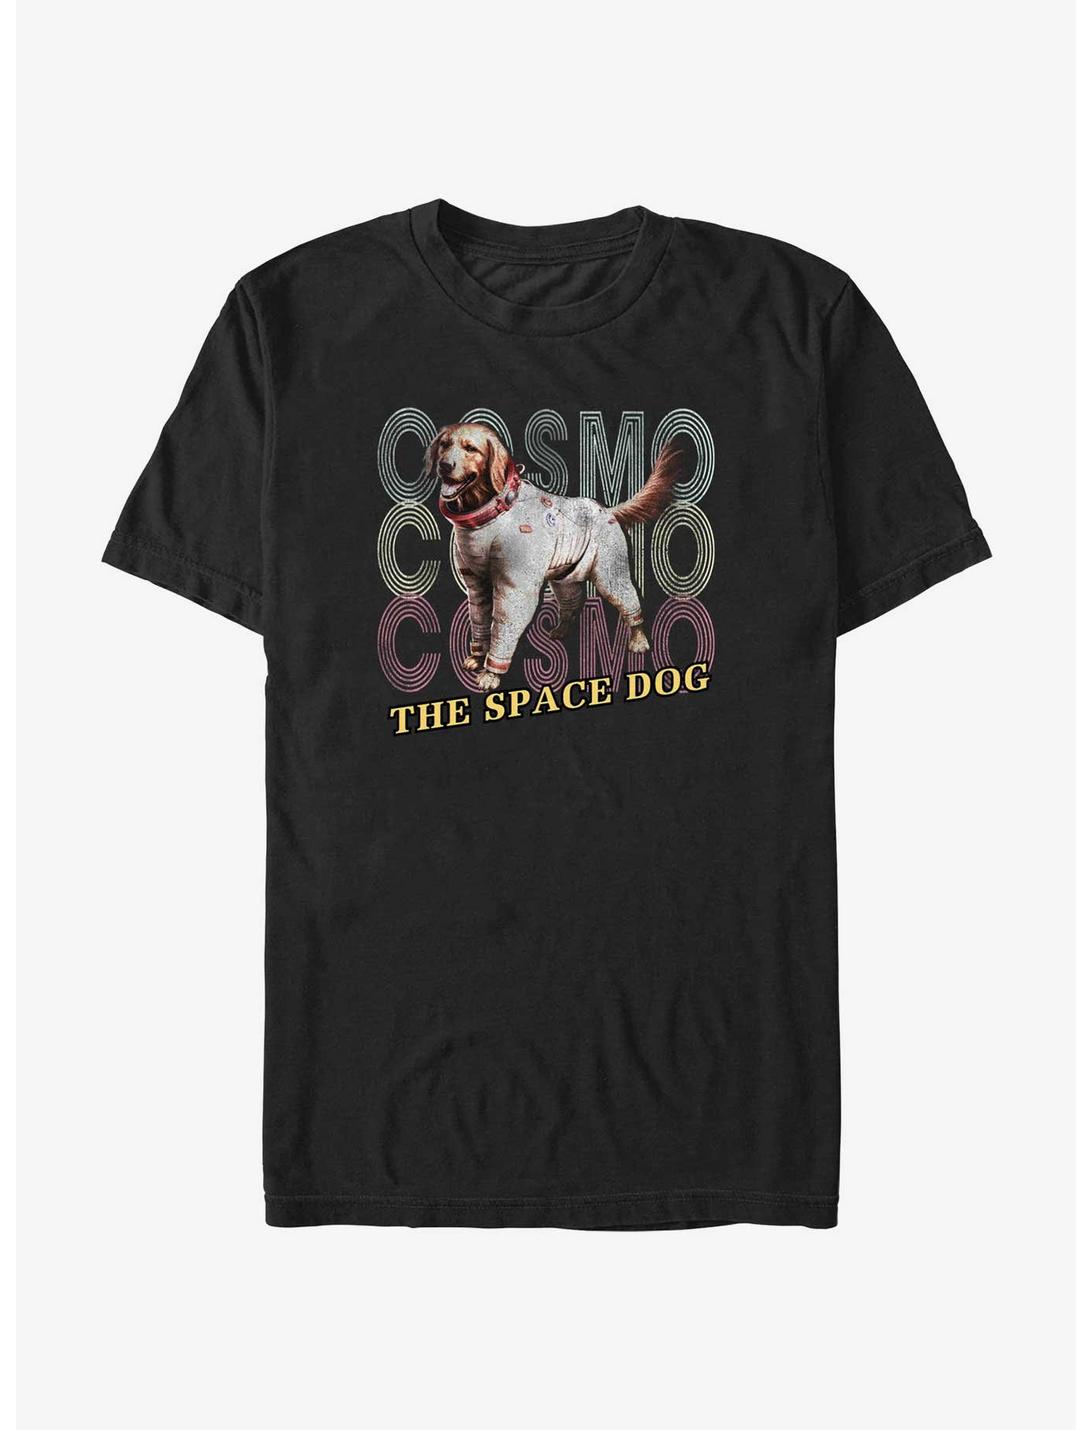 Marvel Guardians of the Galaxy Vol. 3 Space Dog Cosmo T-Shirt, BLACK, hi-res